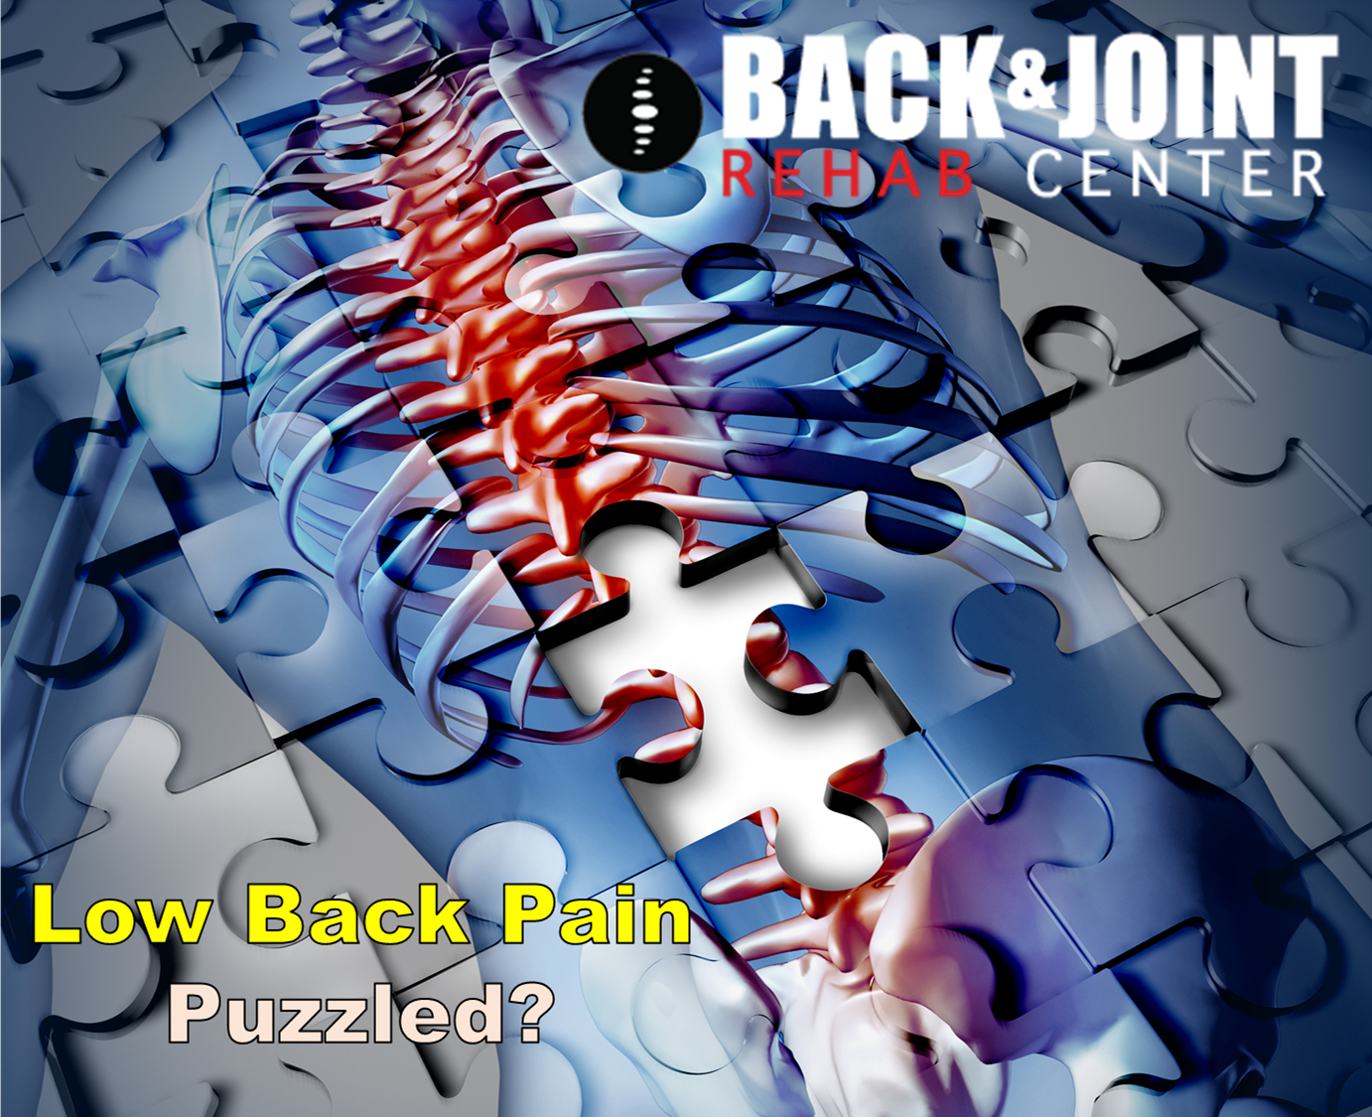 McKenzie-Method-Physical-Therapy-Chiropractor-Lower-Back-Pain-Sciatica-Herniated-Disc-Crown-Point-Merrillville-Lowell